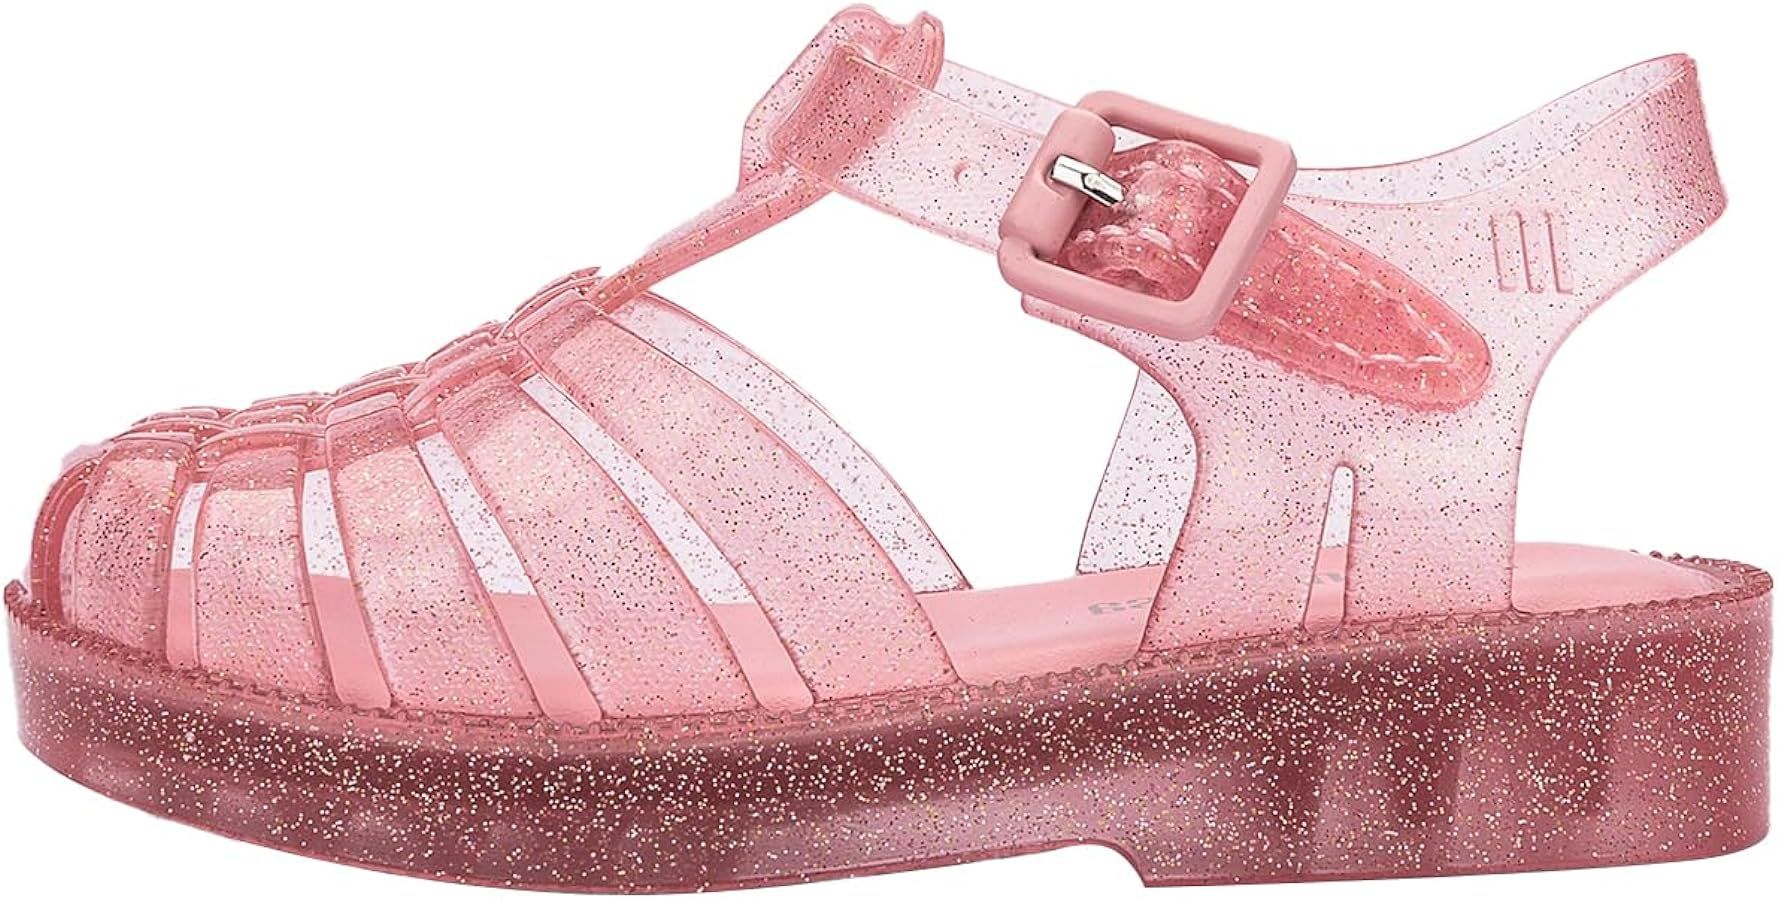 Mini Melissa Possession Jelly Sandal for Babies & Toddlers - The Iconic 90s Original Jelly Shoe, ... | Amazon (US)